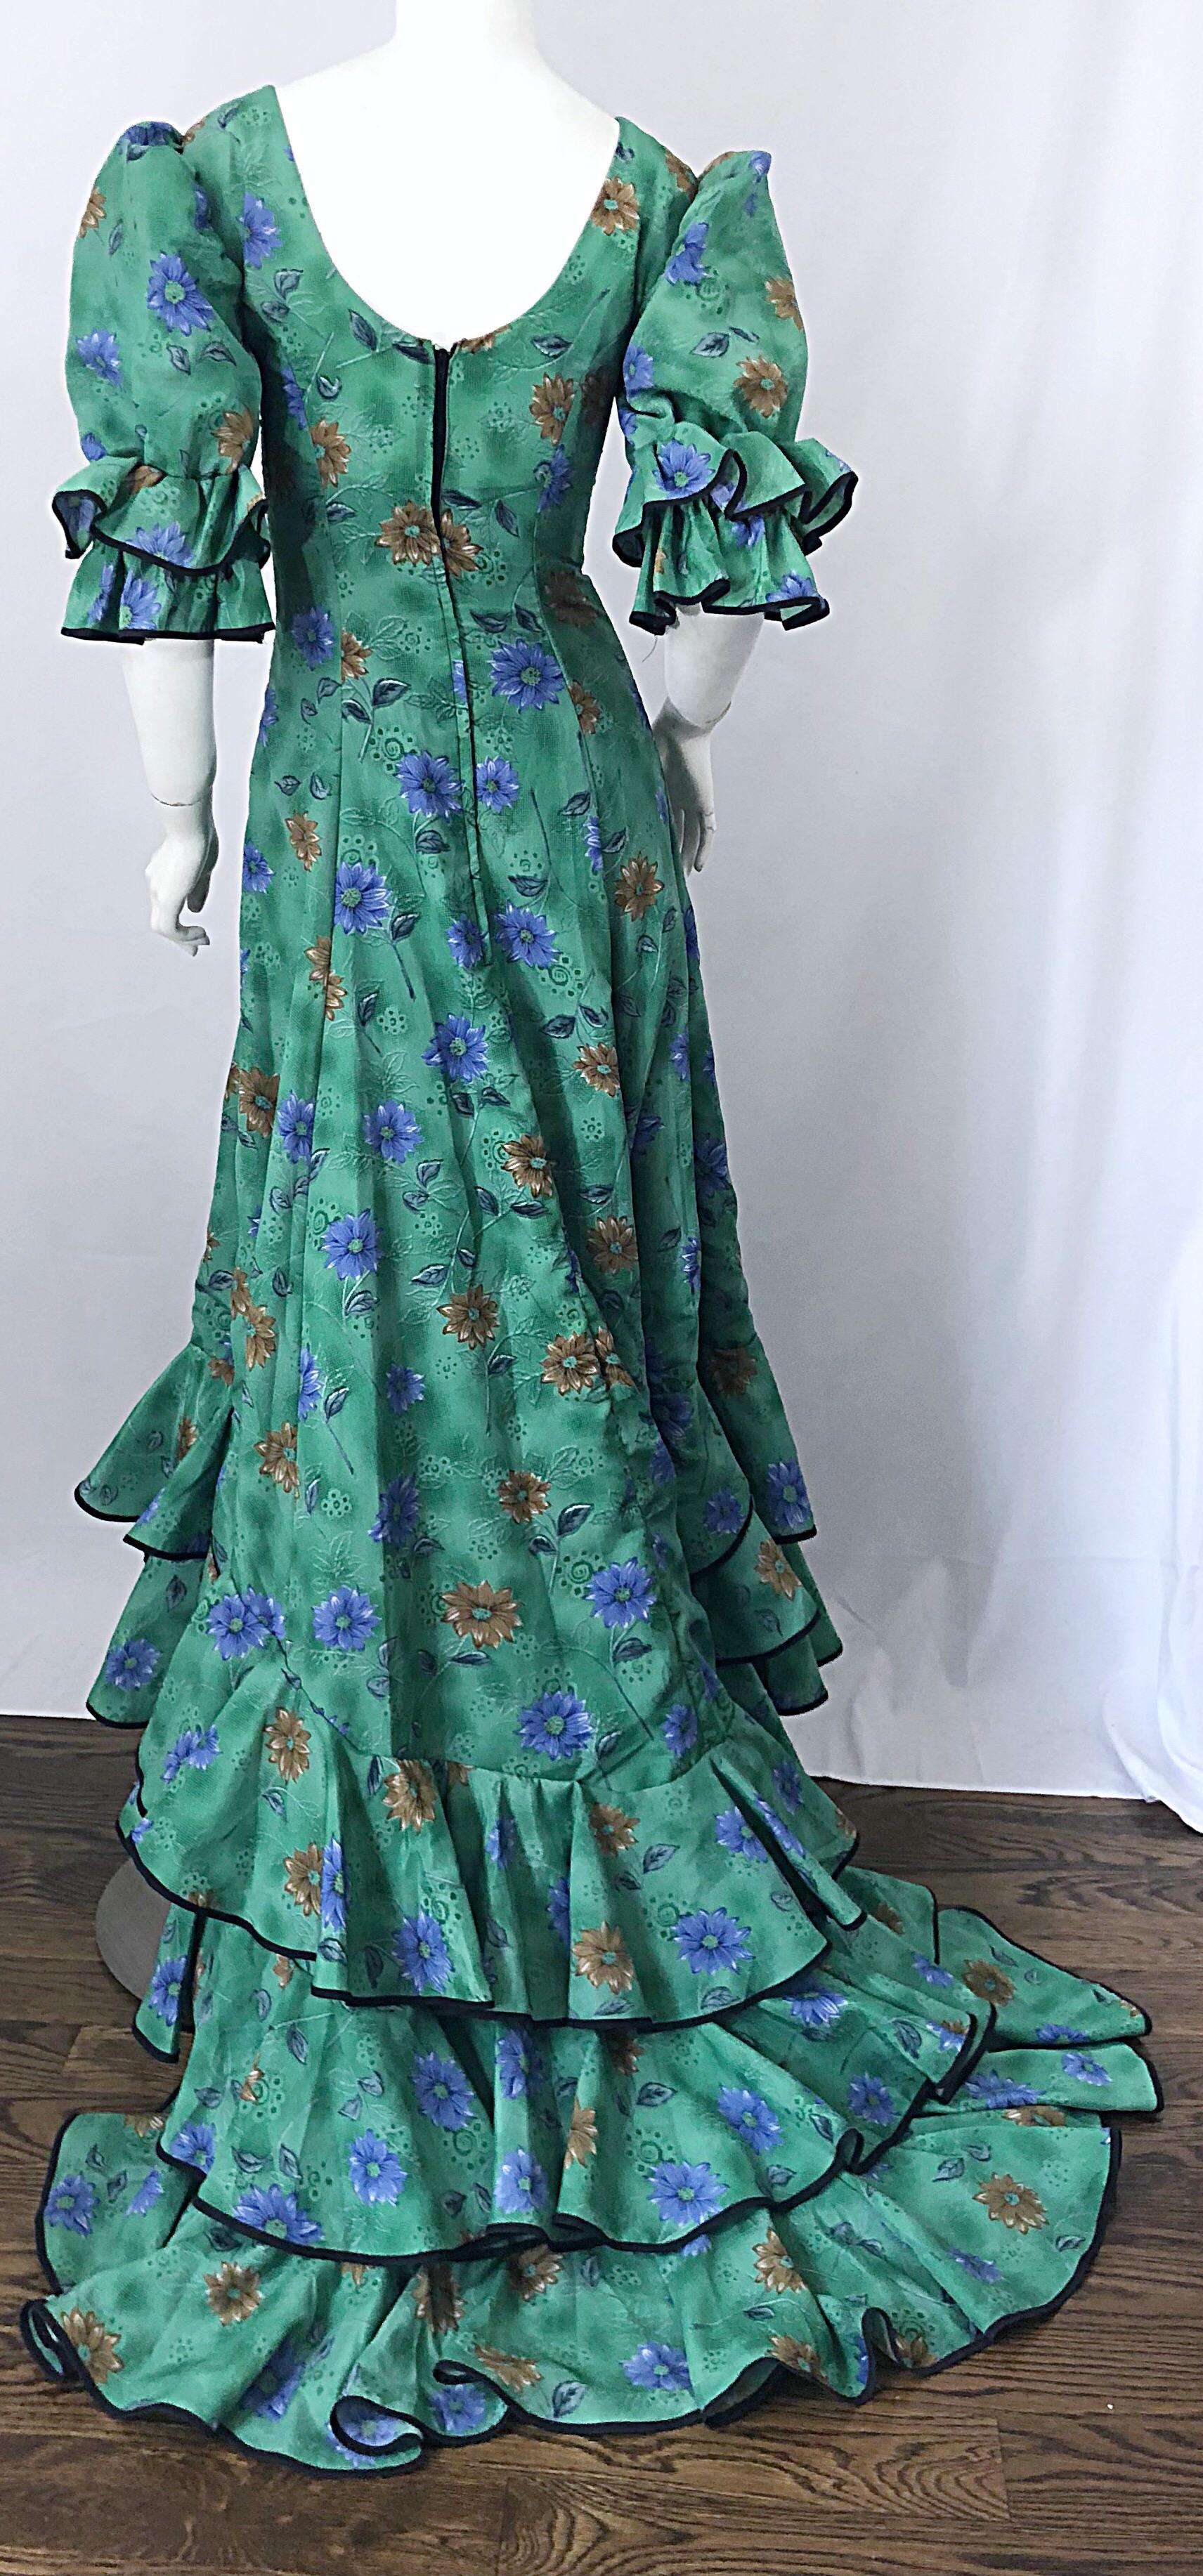 Amazing Vintage Victorian Inspired 1970s Does 1800s Steampunk Green ...